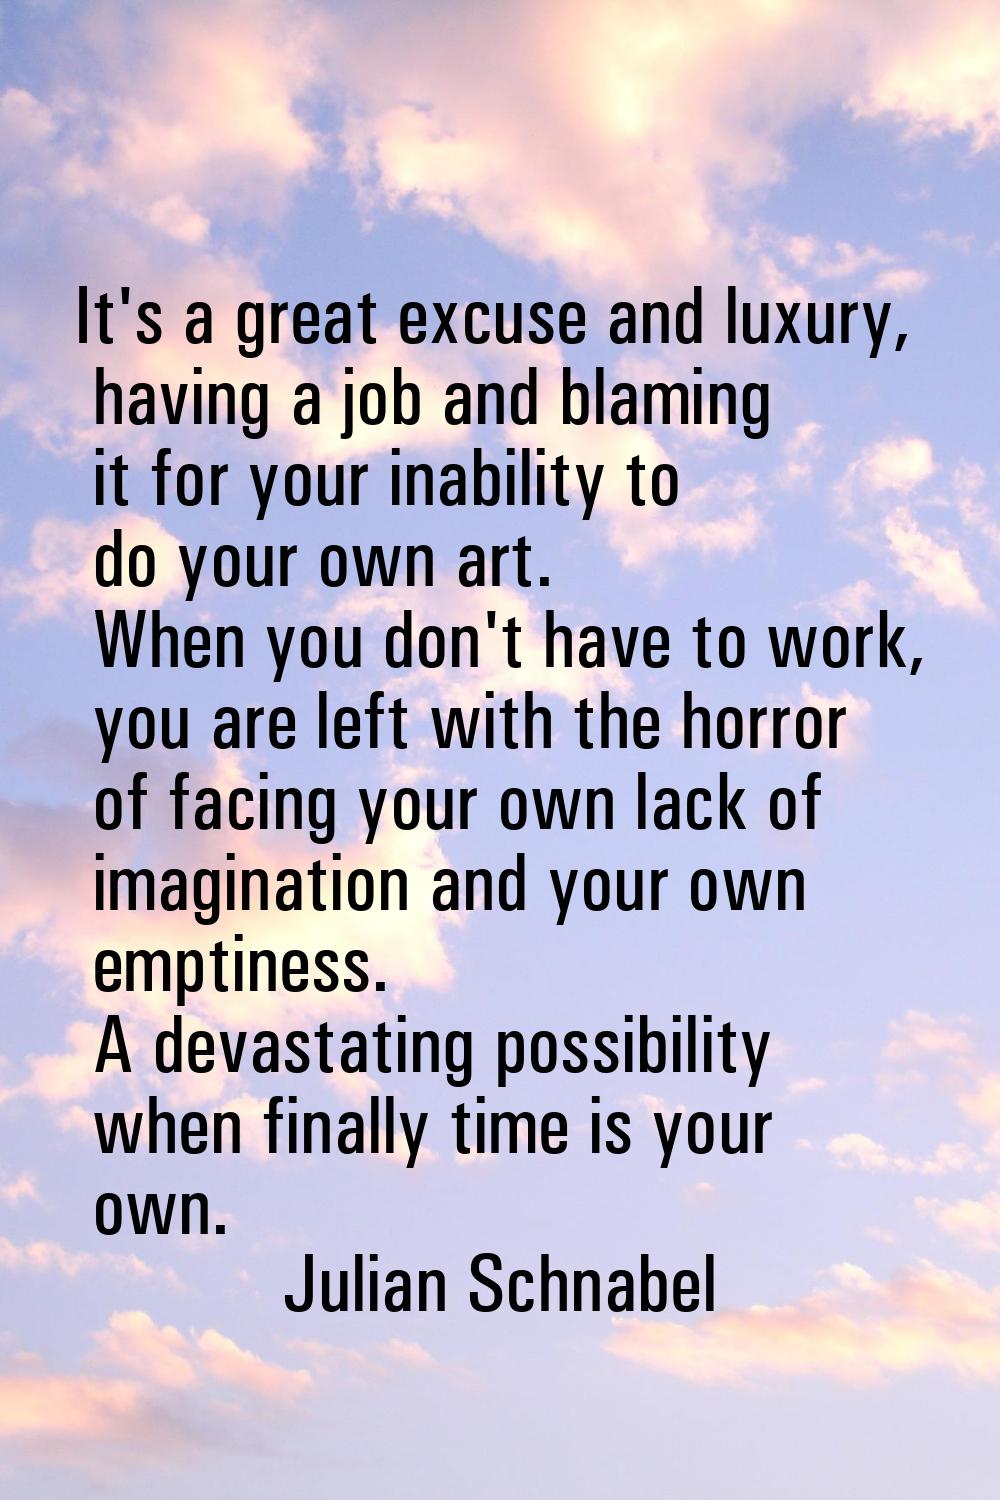 It's a great excuse and luxury, having a job and blaming it for your inability to do your own art. 